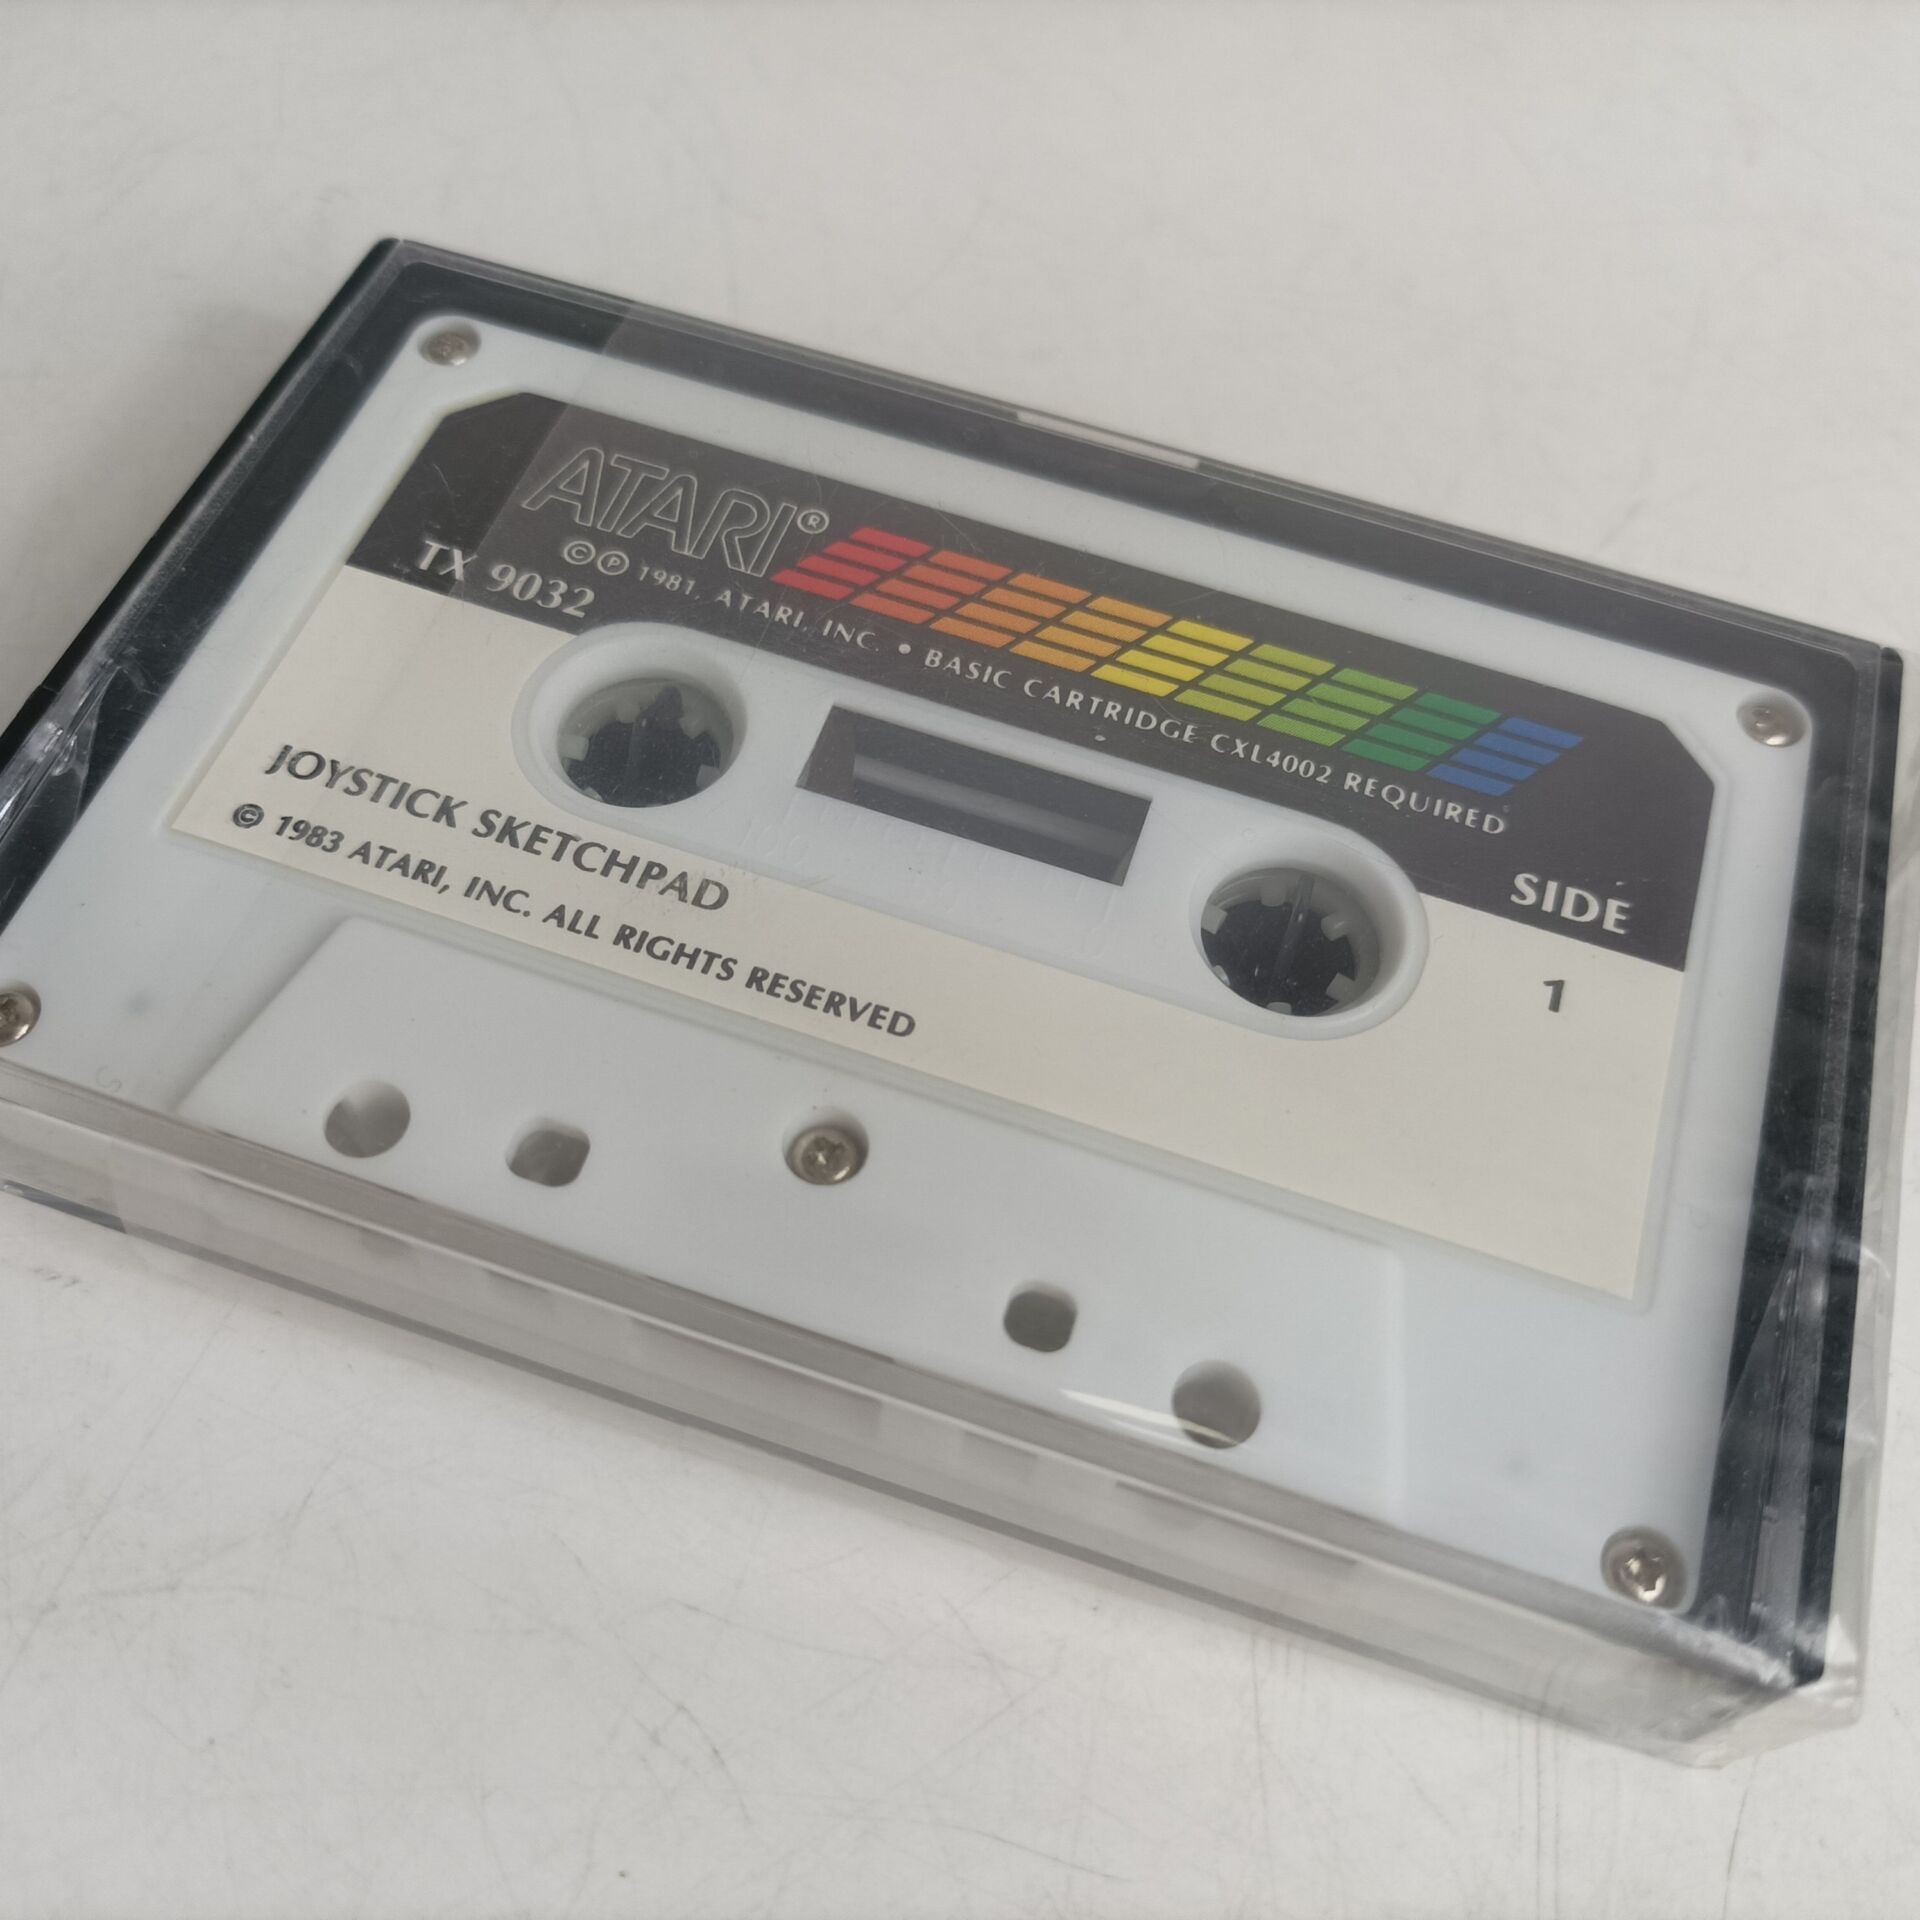 Vintage ATARI TX9032 (1983) Welcome Software Sample Cassette Tape